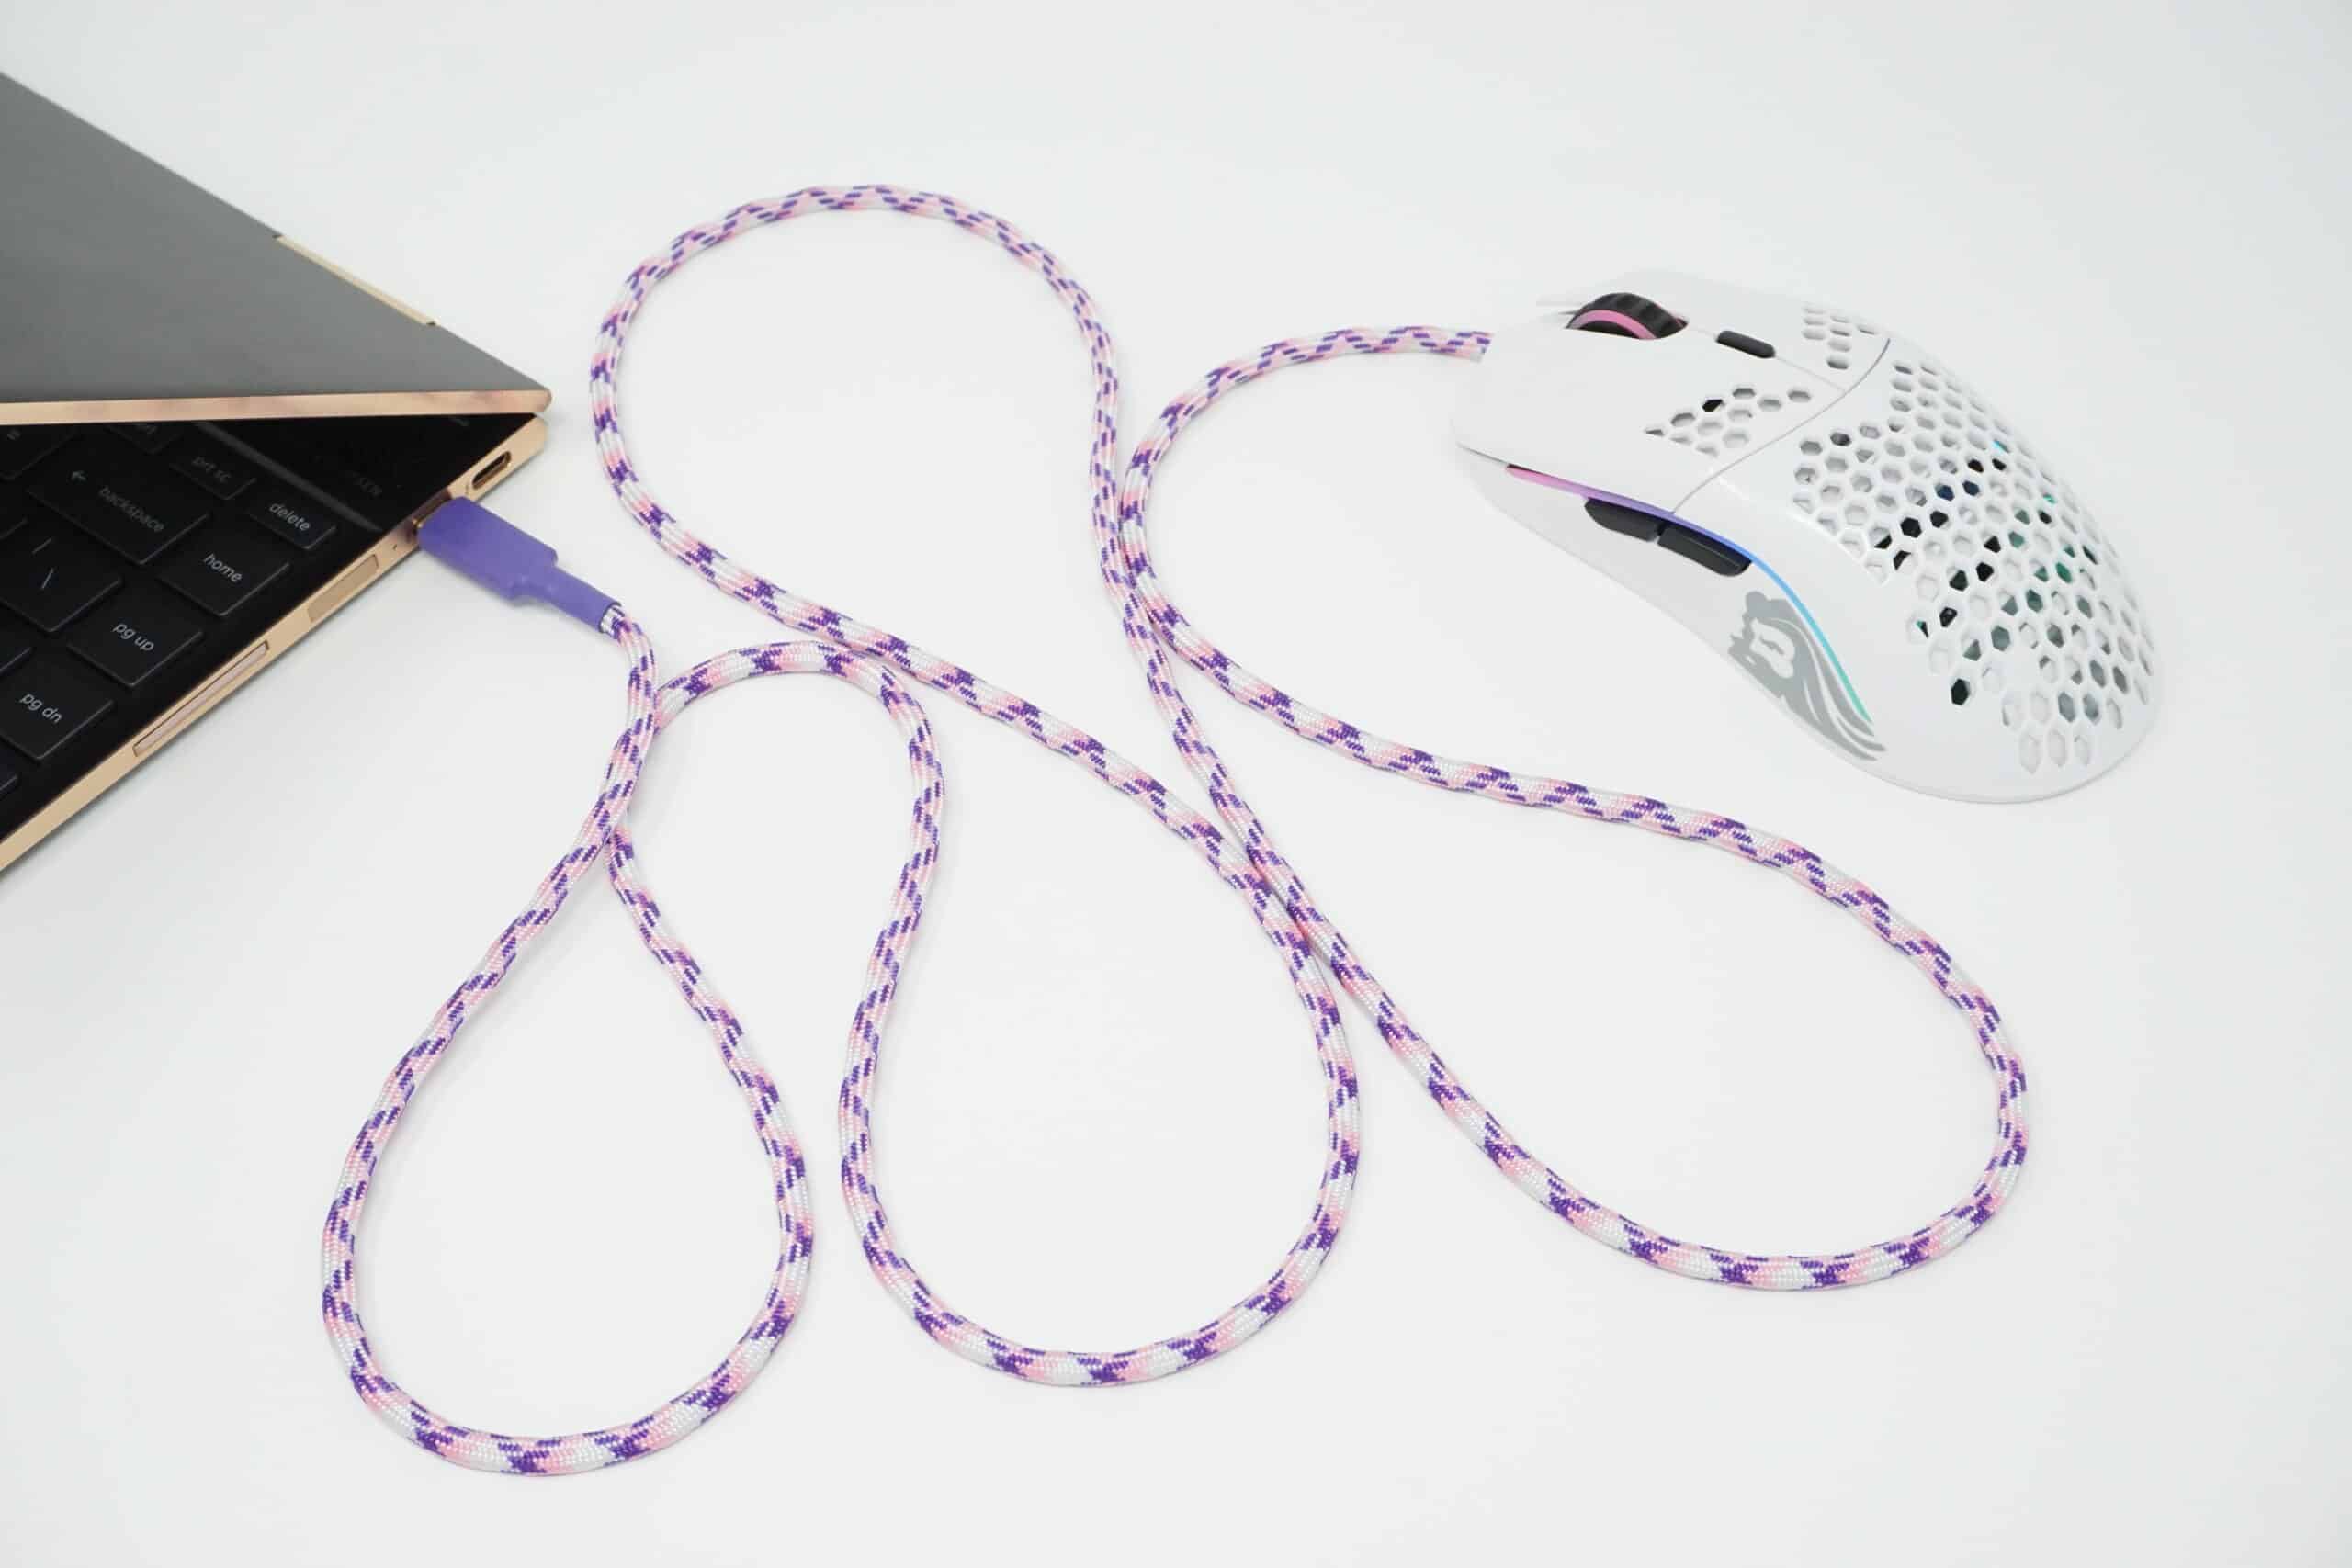 USB-C Mouse Paracord in white and purple installed into wired mouse plugged into laptop USB-C port